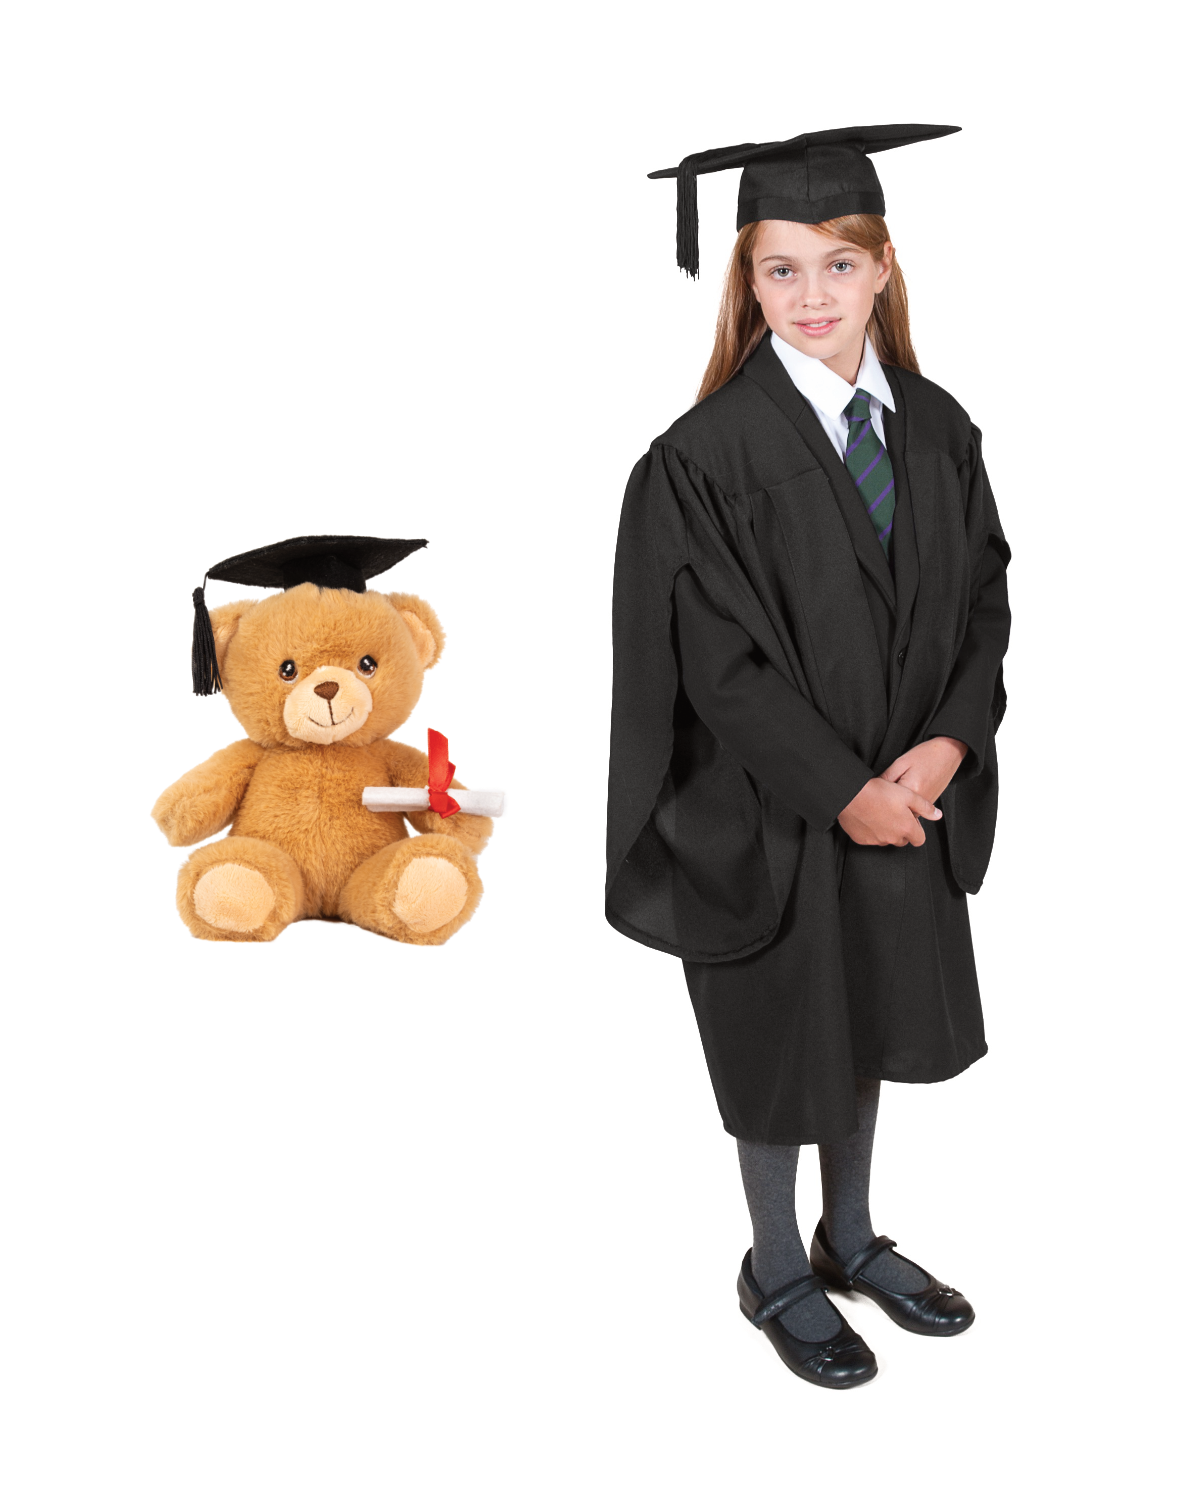 Graduate from Home | Children's Premium Package